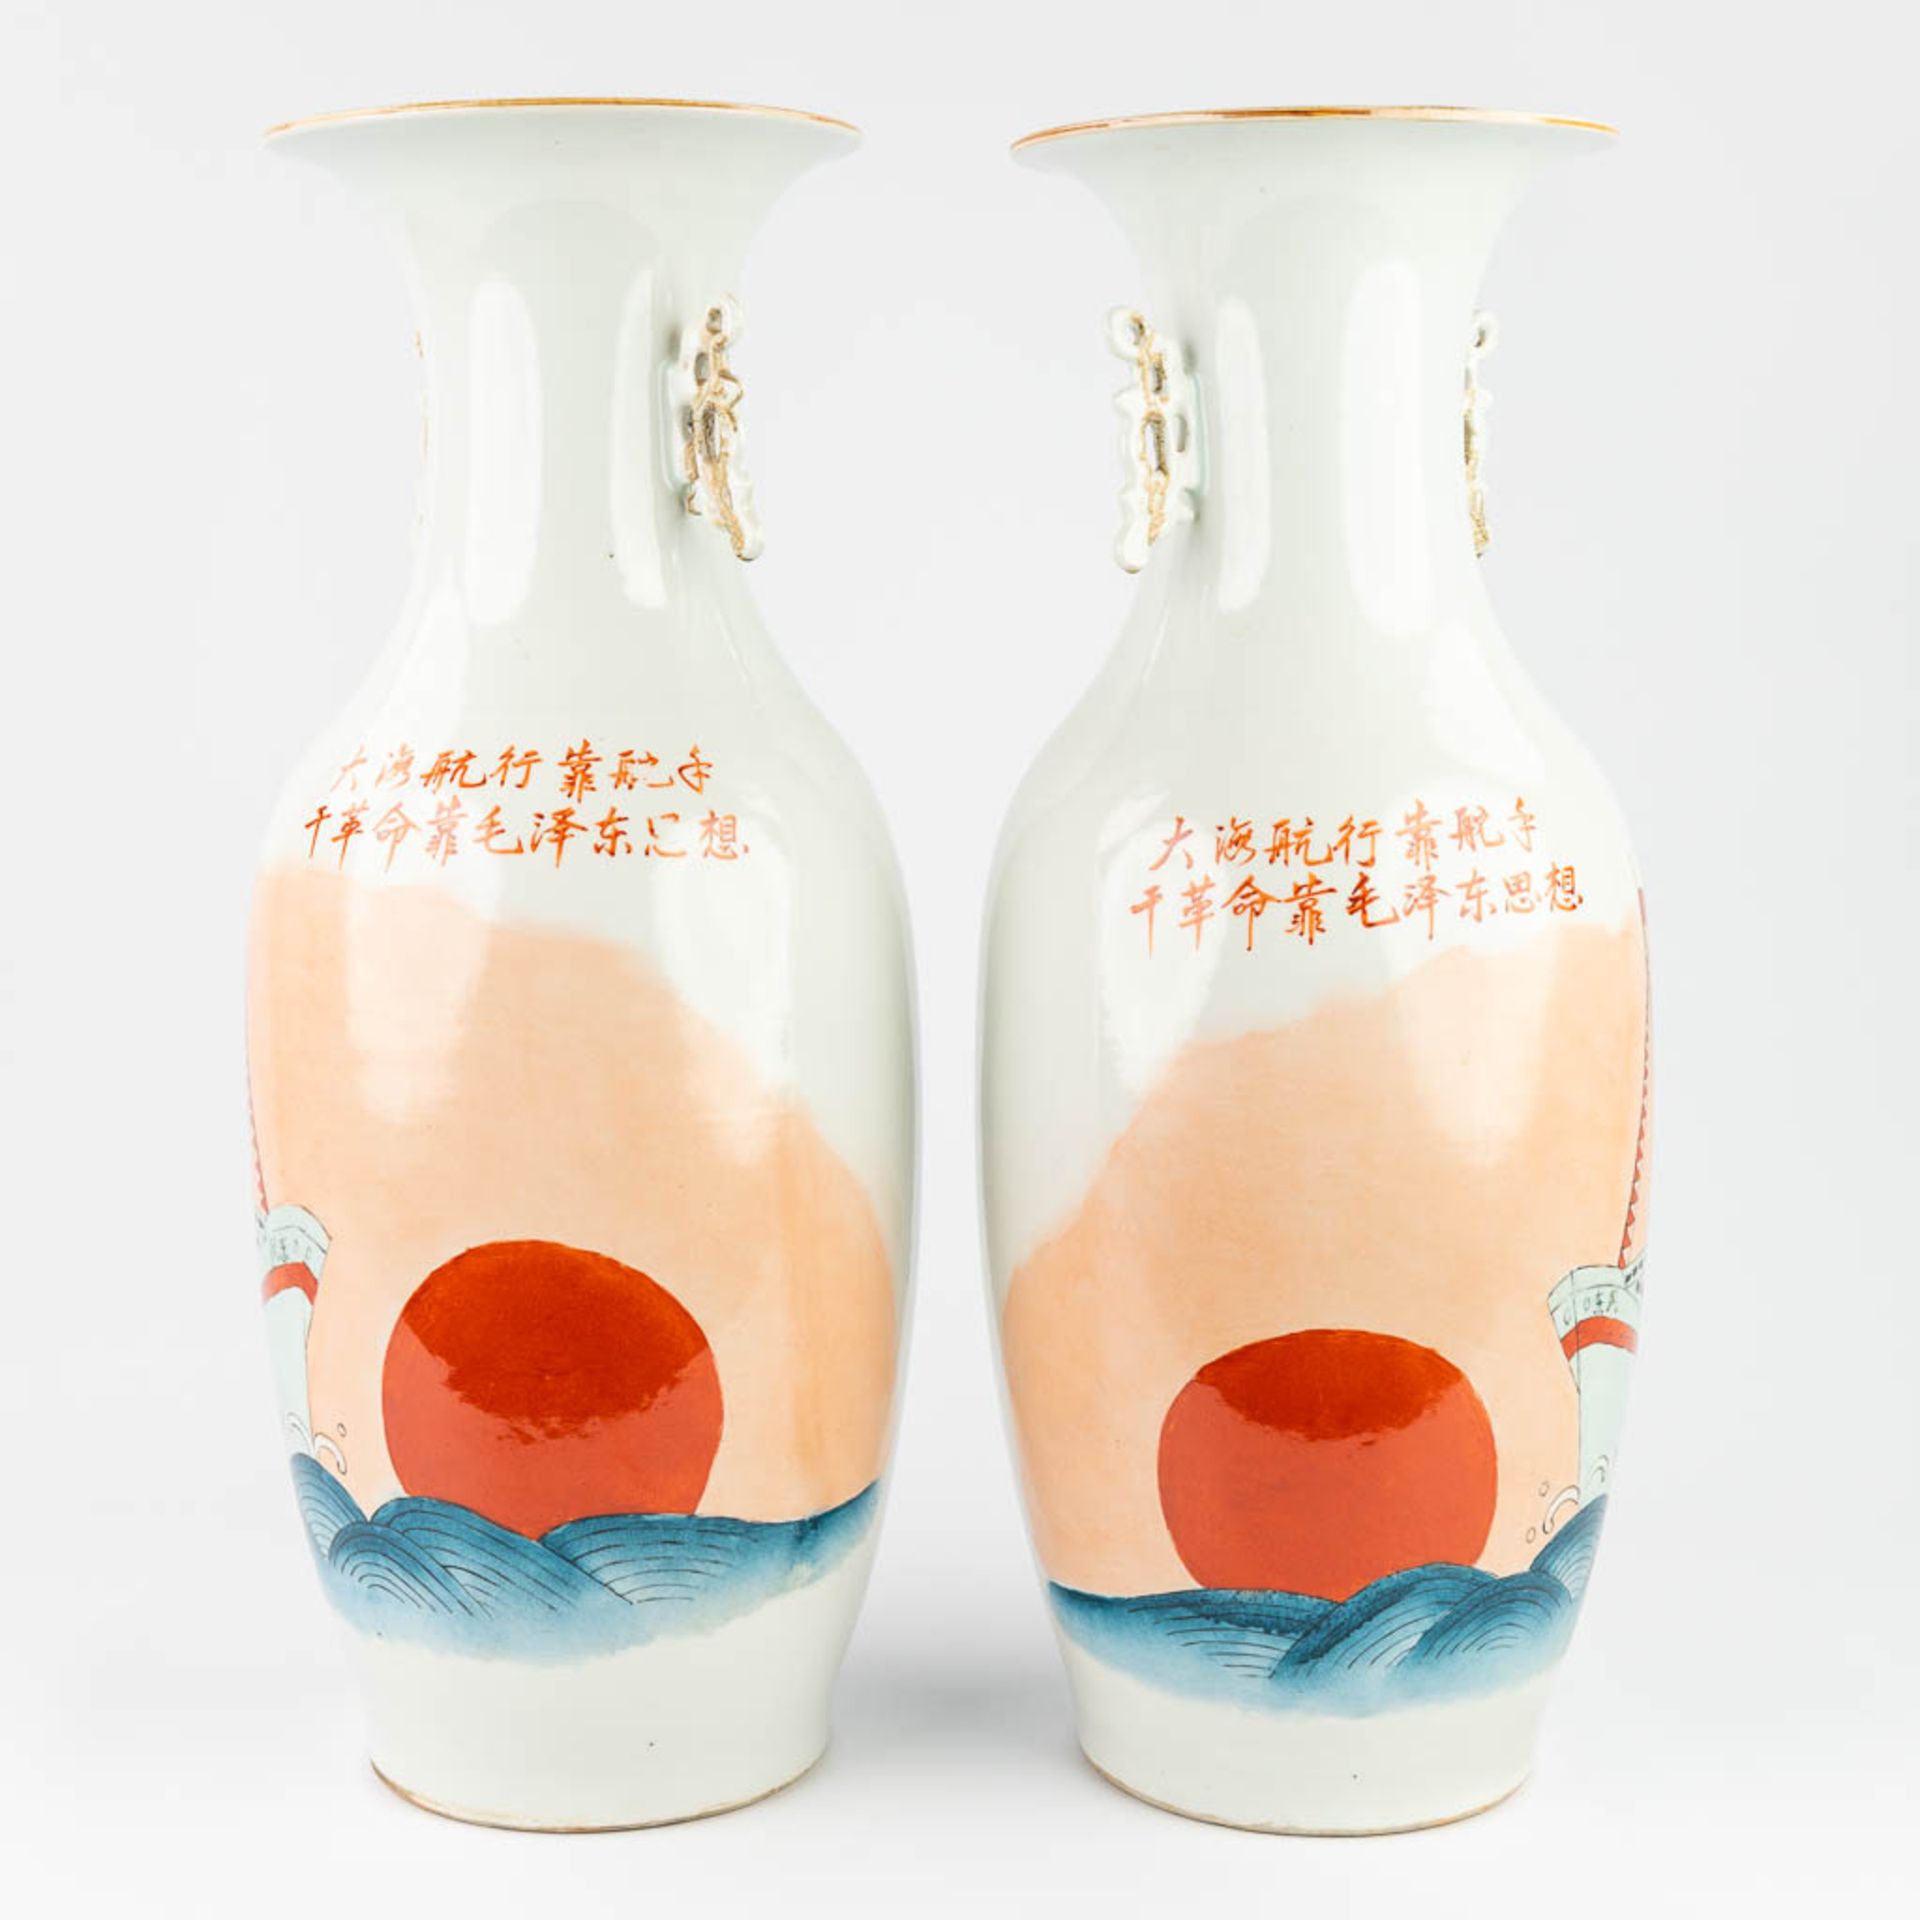 A pair of Chinese vases made of glazed porcelain, and decorated with ships (59,5 x 23 cm) - Image 5 of 14